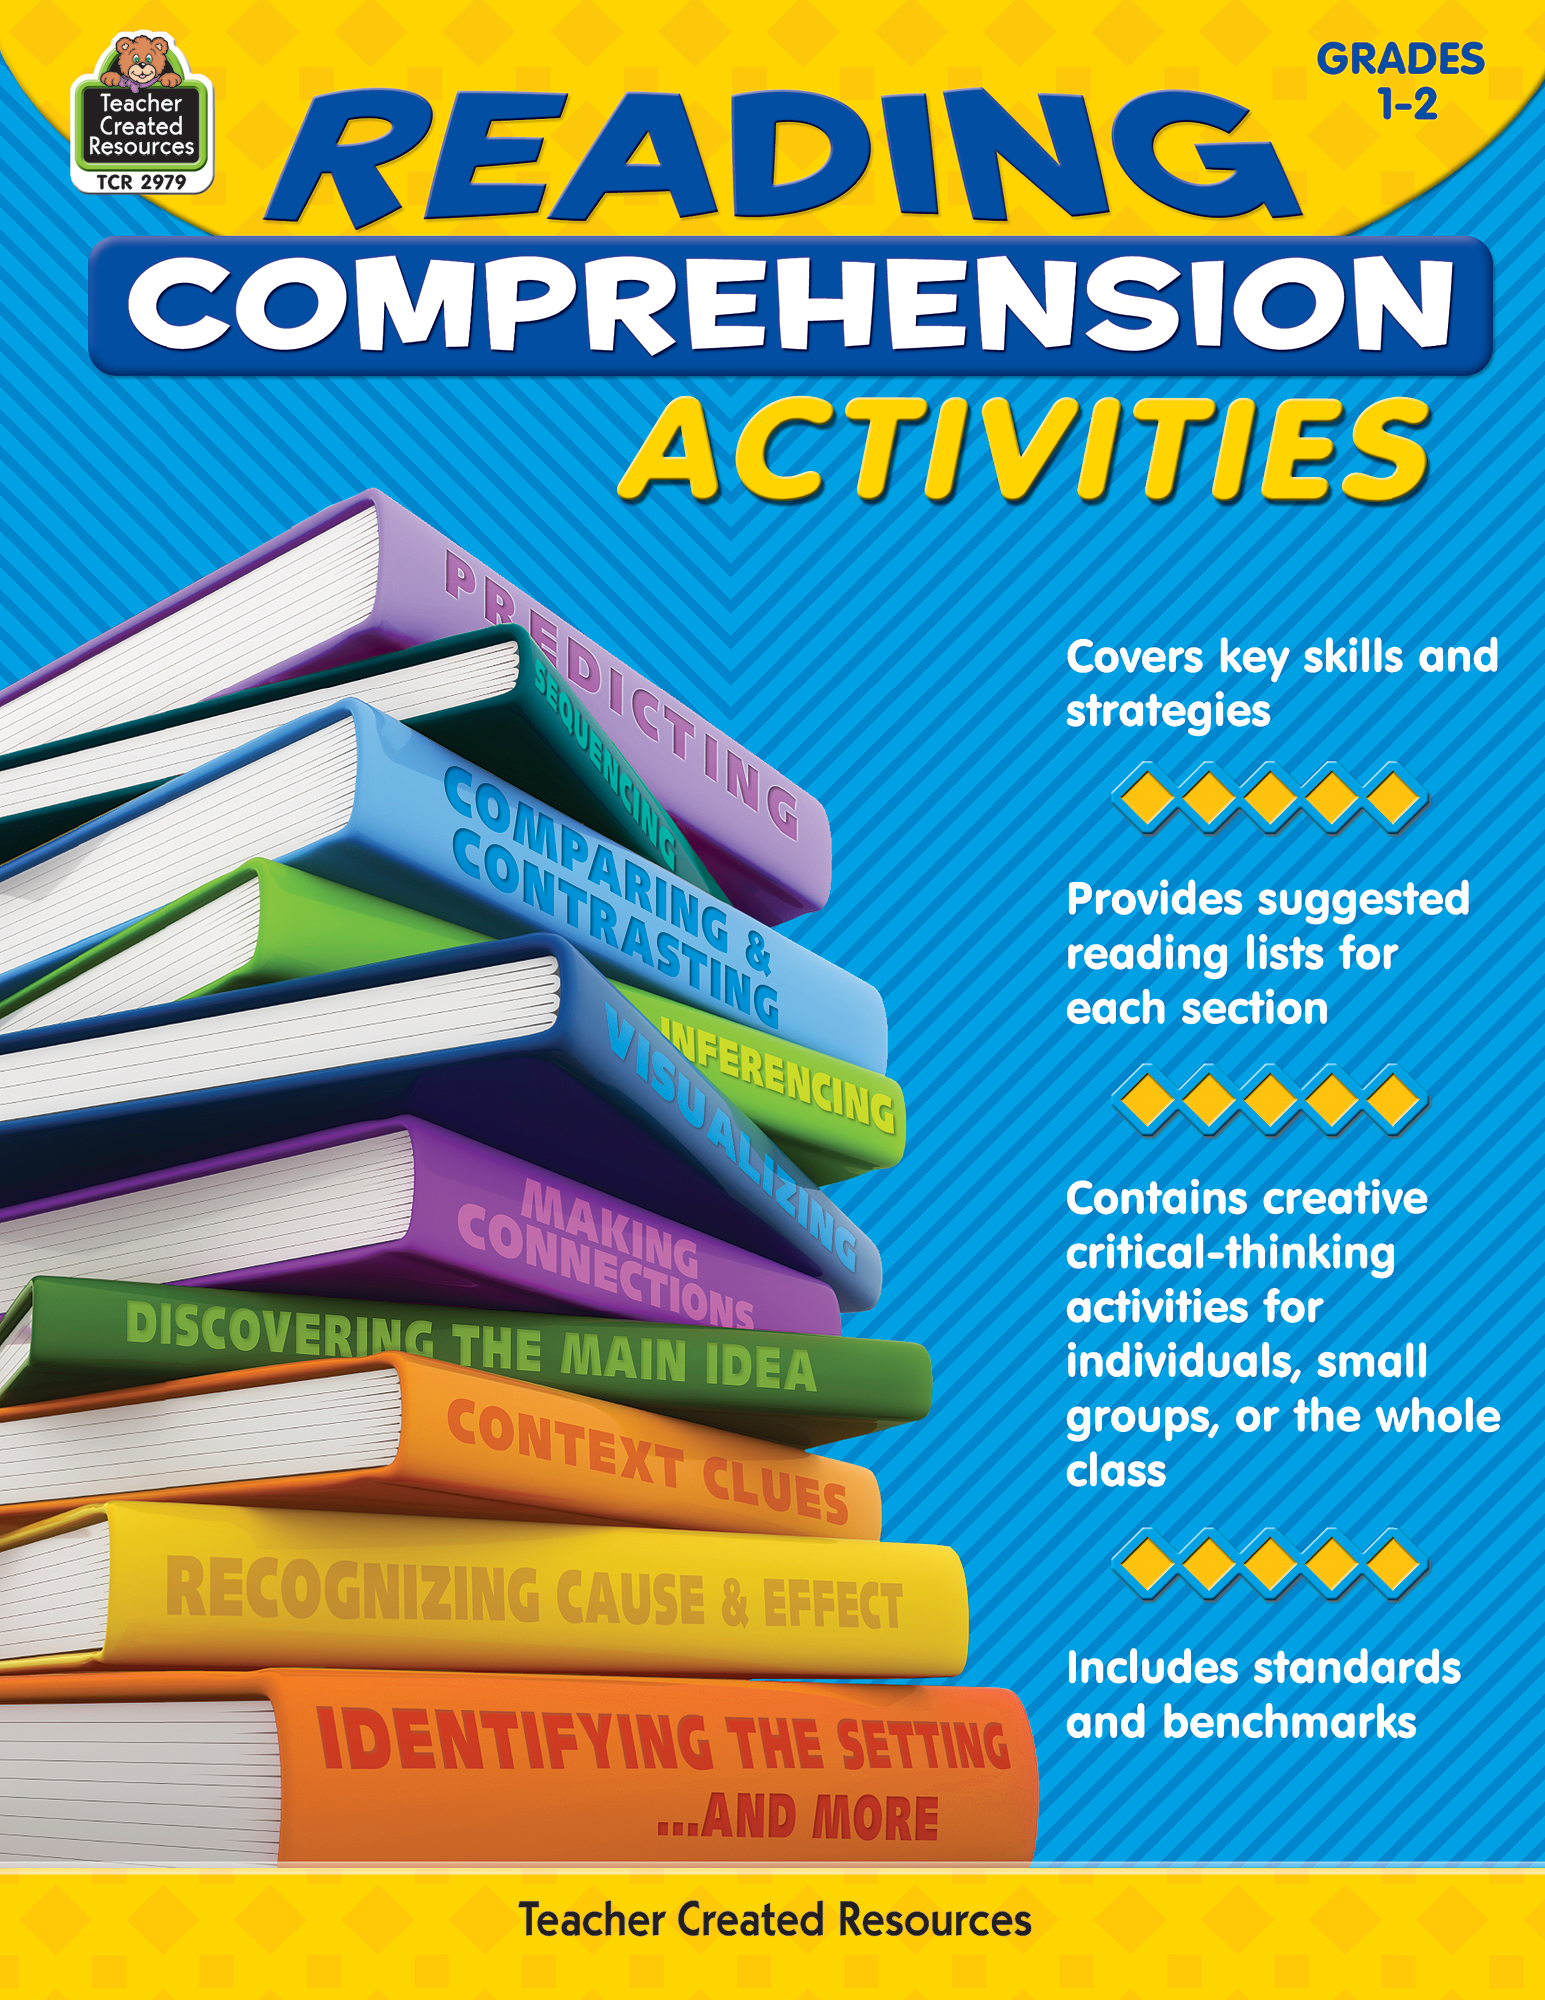 reading-comprehension-grade-1-teacher-created-resources-ready-set